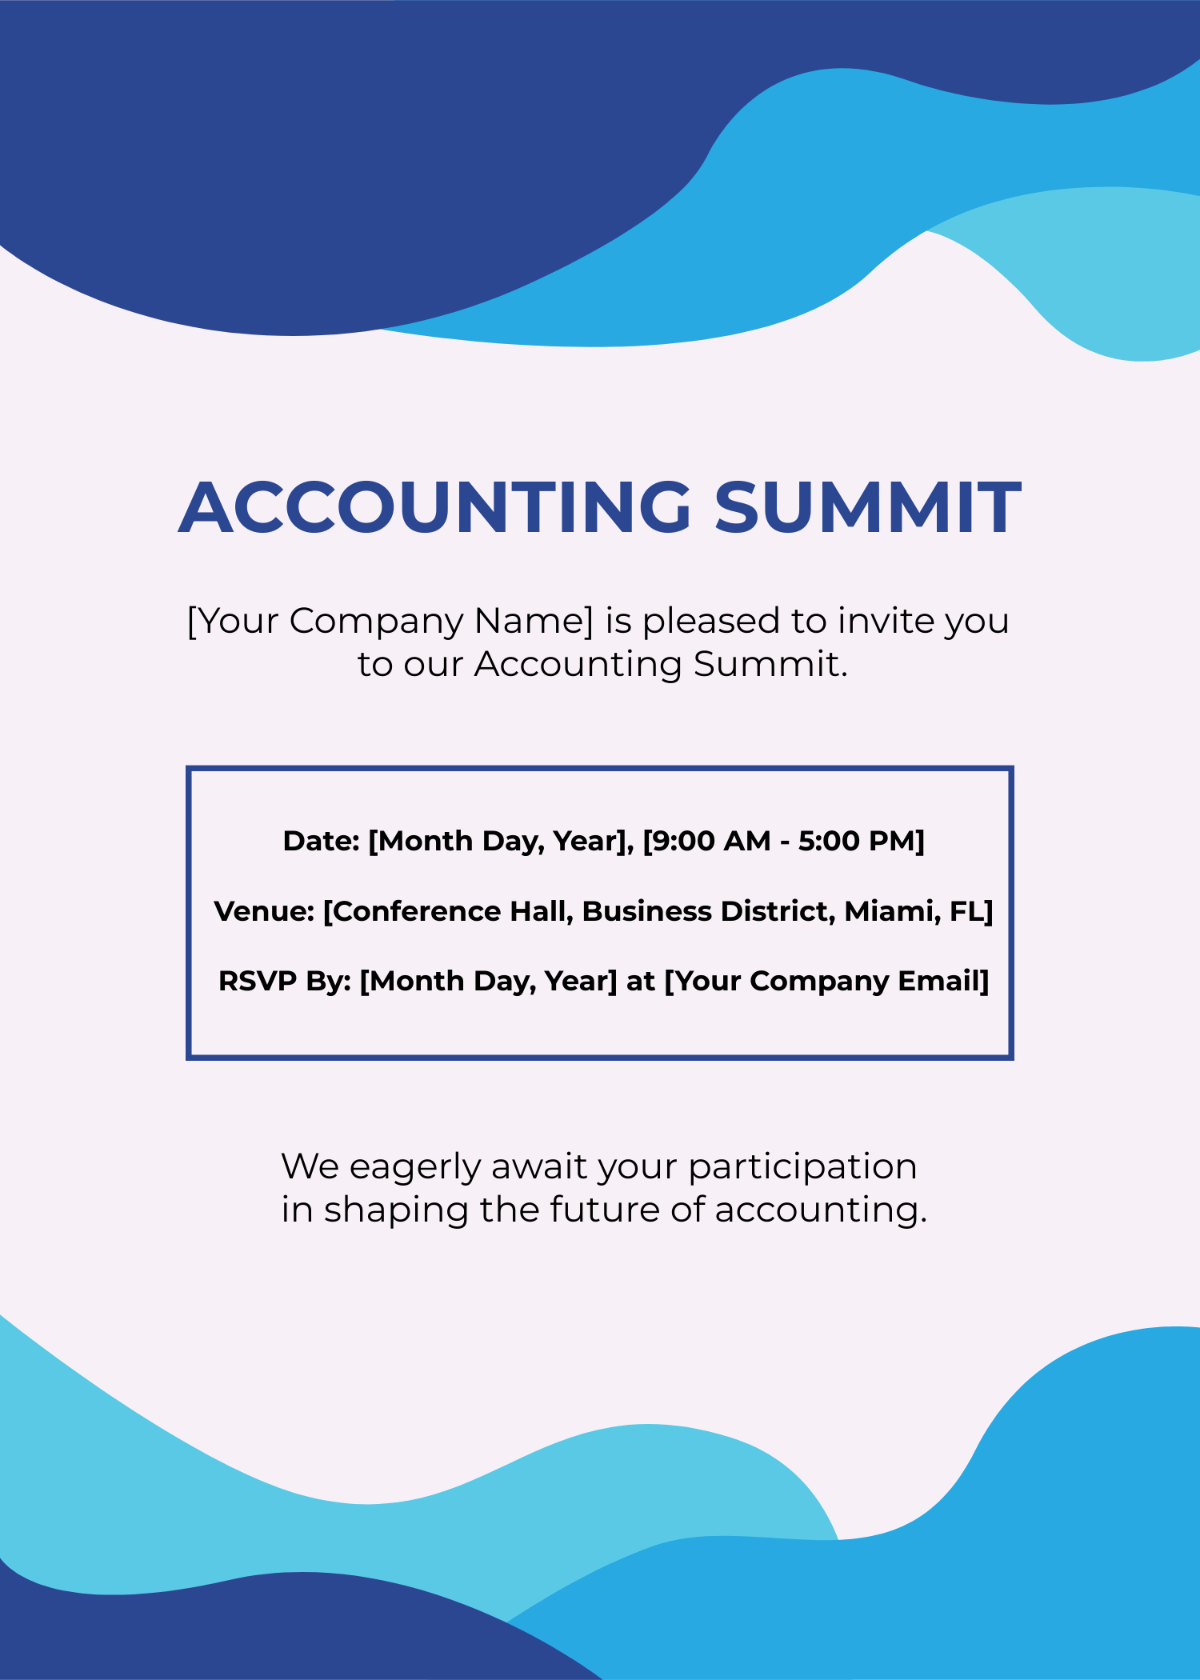 Accounting Summit Invitation Card Template